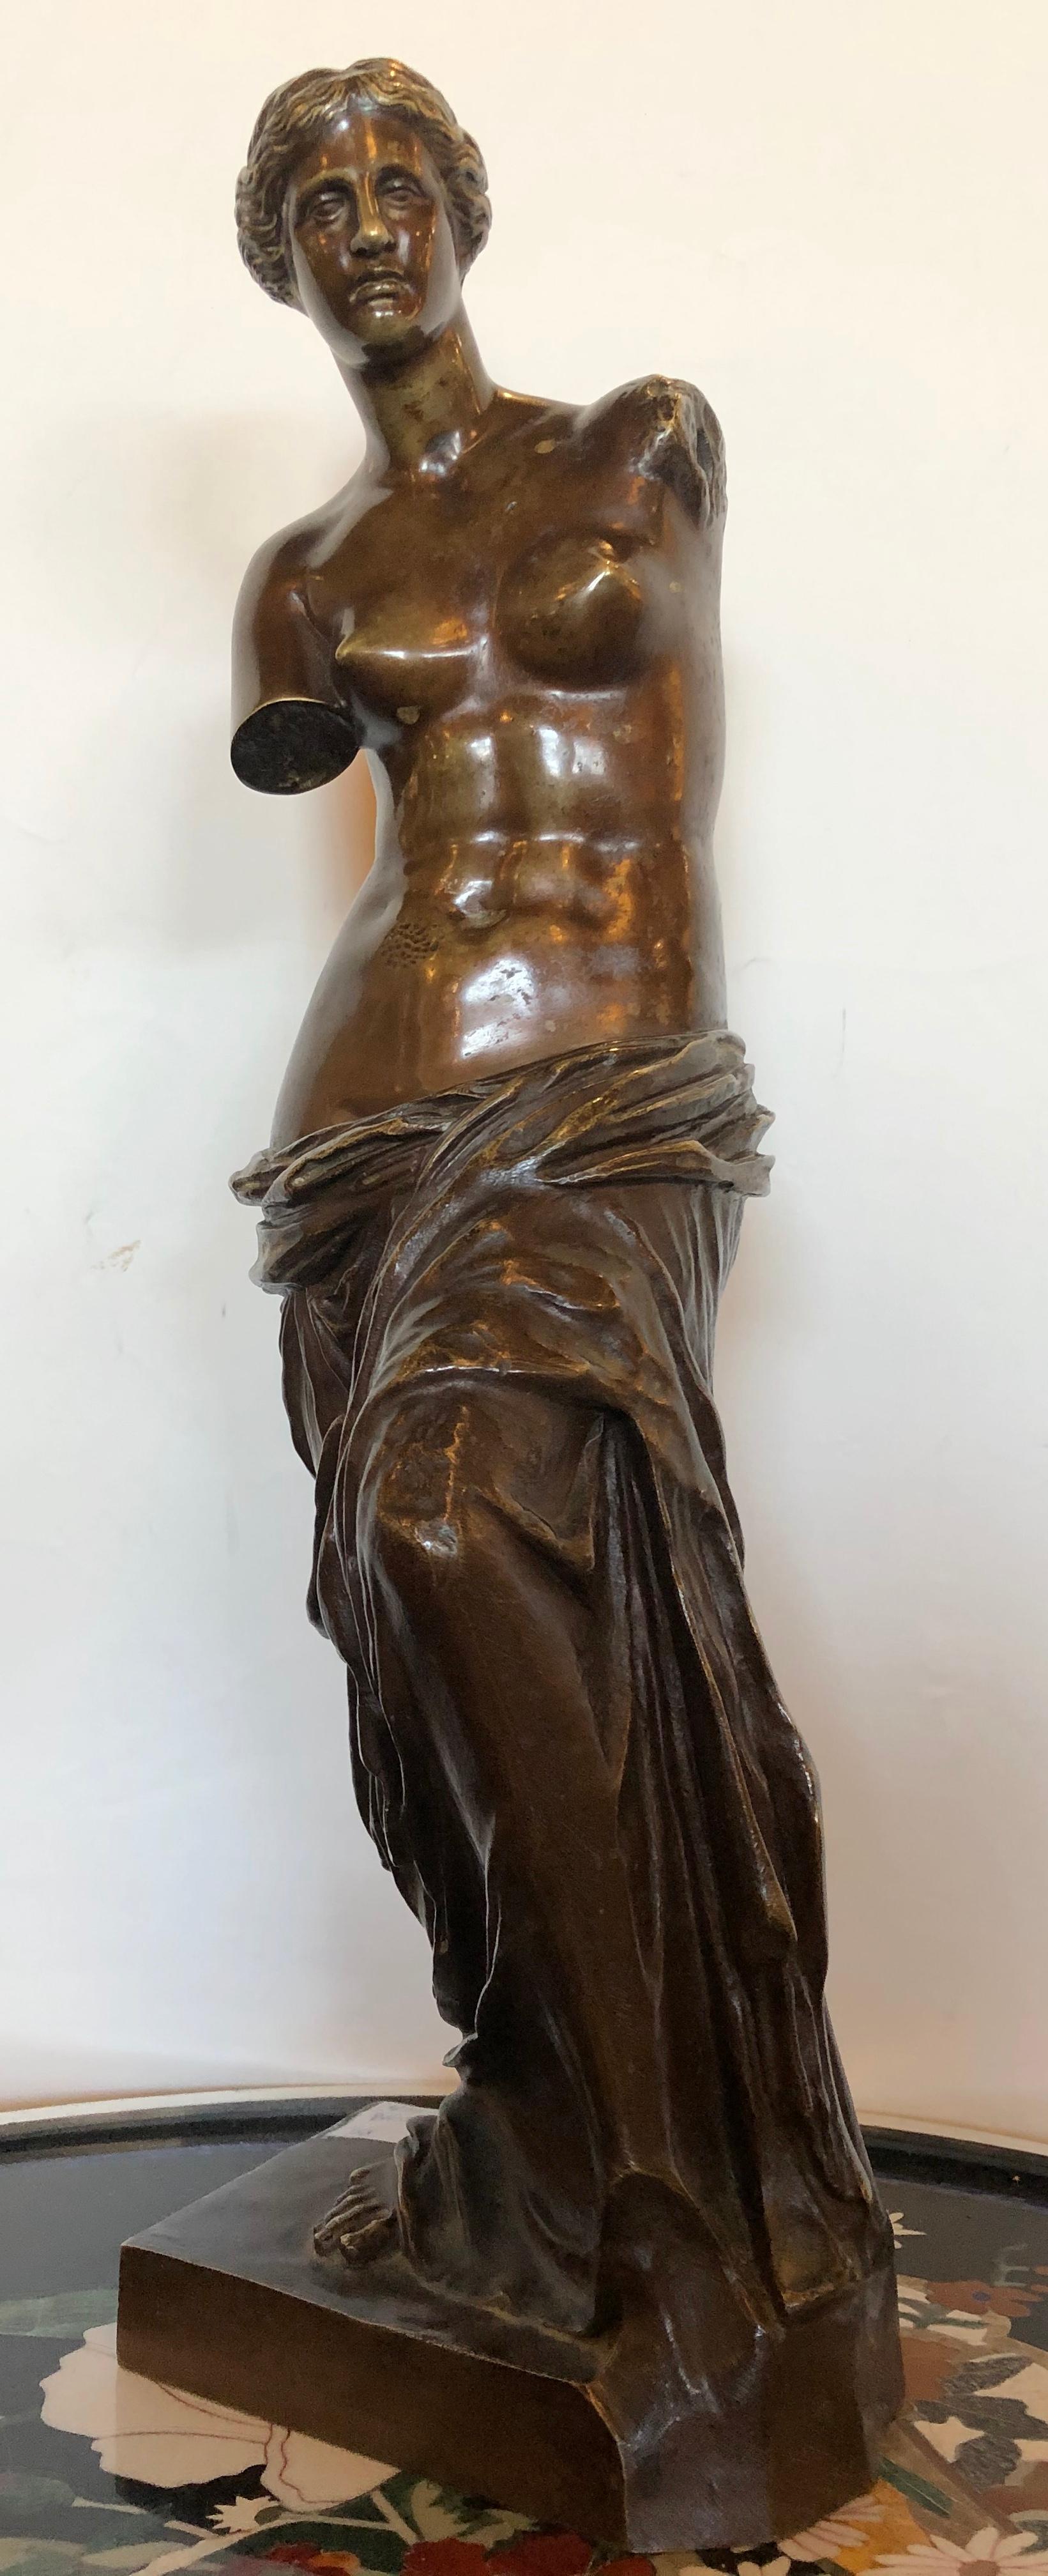 Ron Sauvage signed bronze statue of the Venus de Milo, France, early 20th century. This large and impressive cast bronze, hand finished with antique finish. This statue is reproduction of the famous Venus de Milo now in the Louvre Museum in Paris.